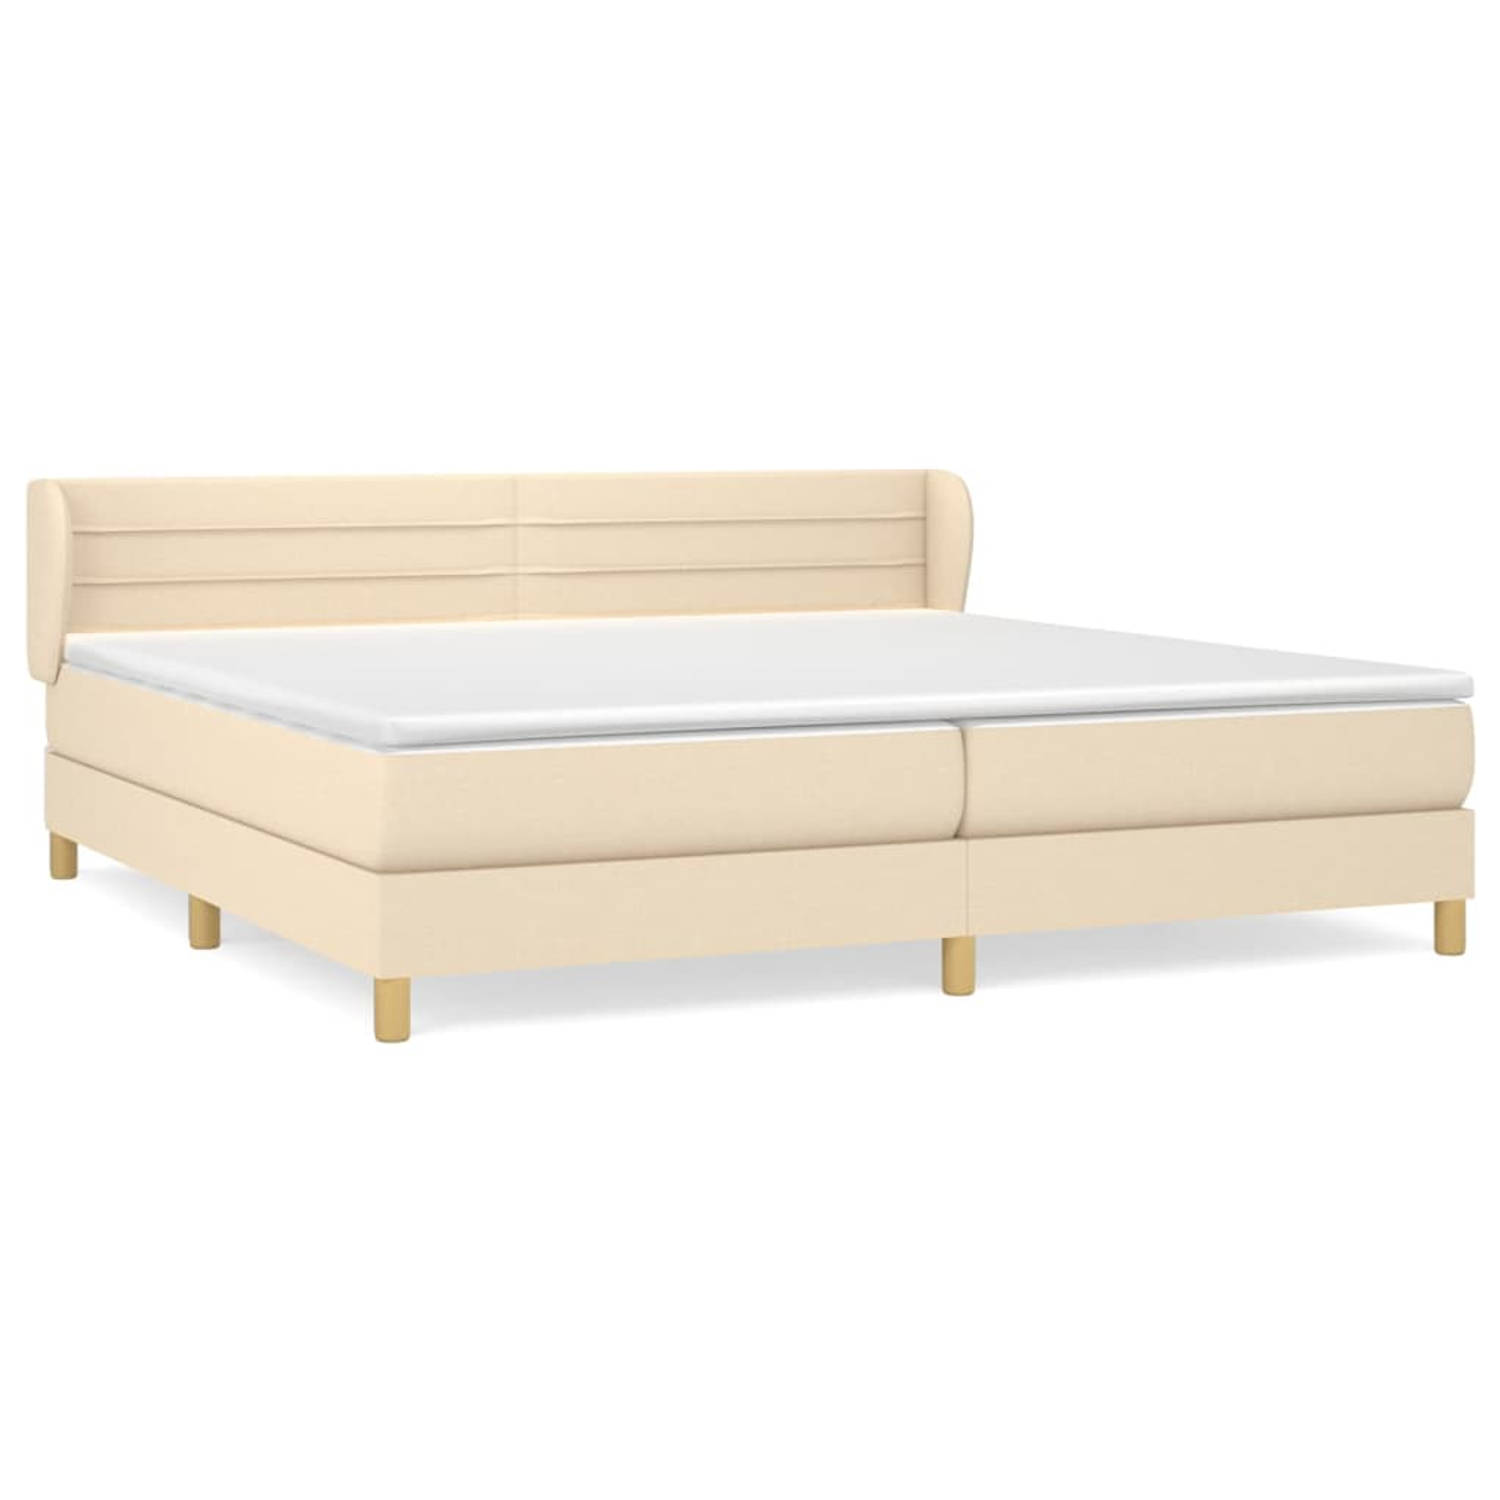 The Living Store Boxspringbed - 203 x 203 x 78/88 cm - Crème stoffen bed - Pocketvering matras